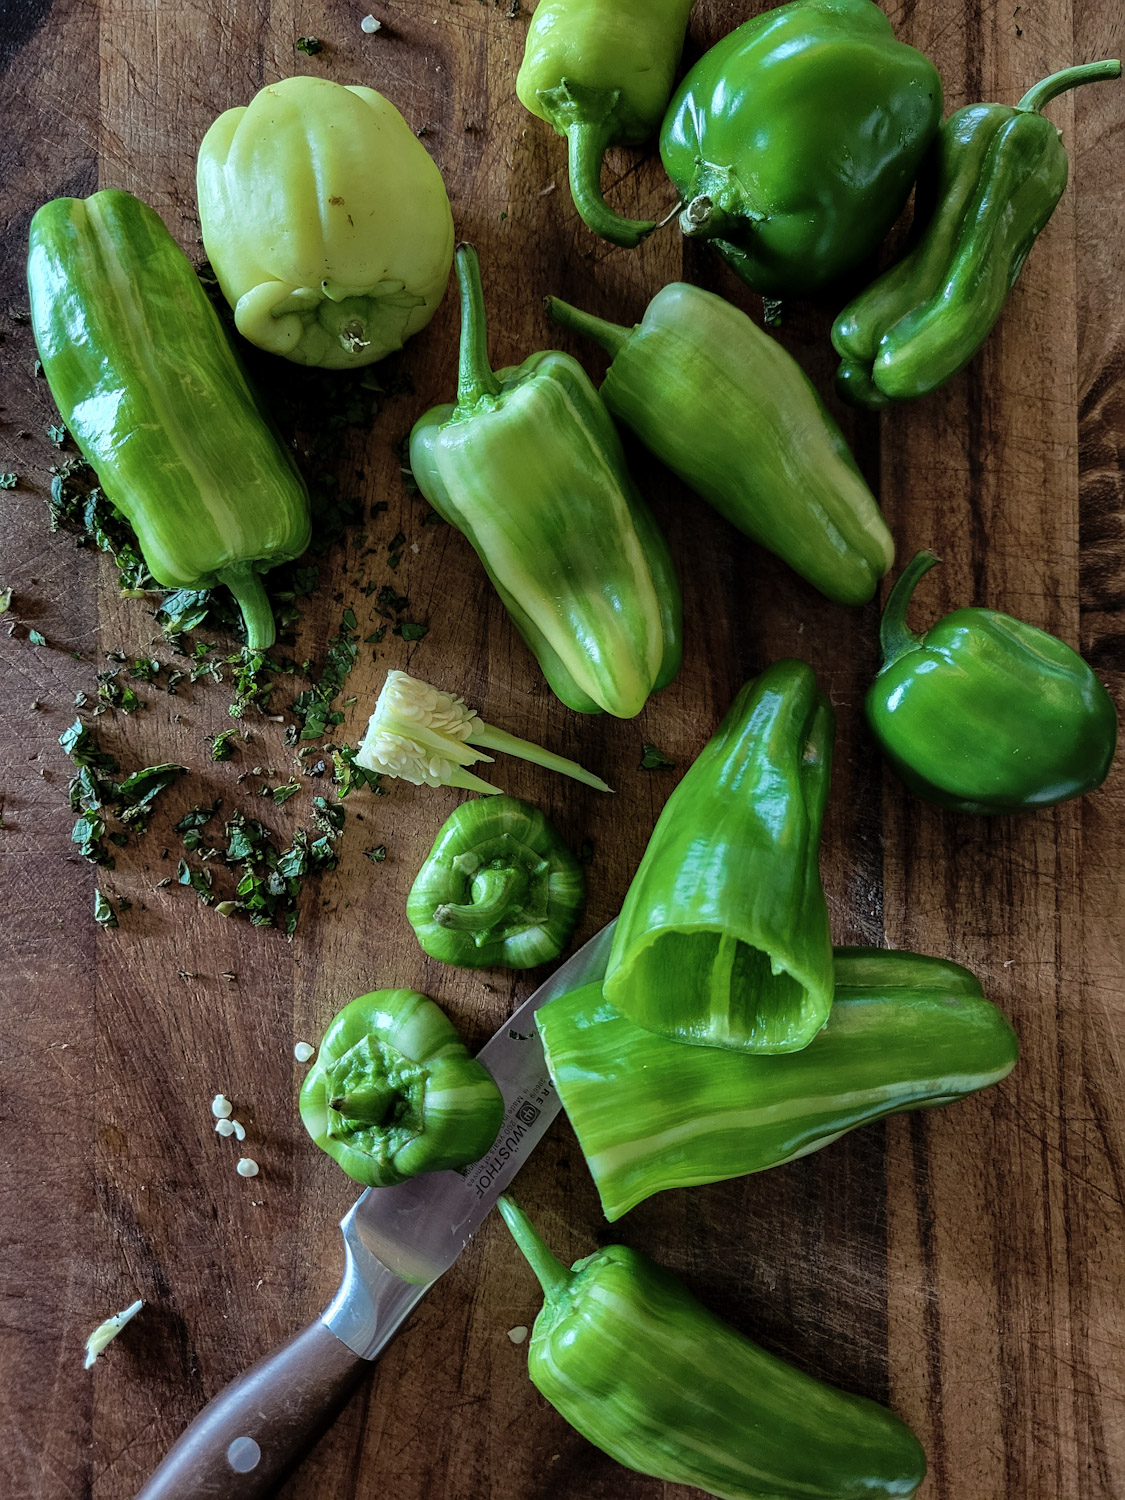 Cutting board with mini green peppers being prepped to be stuffed. A knife and chopped mint are also on the cutting board.